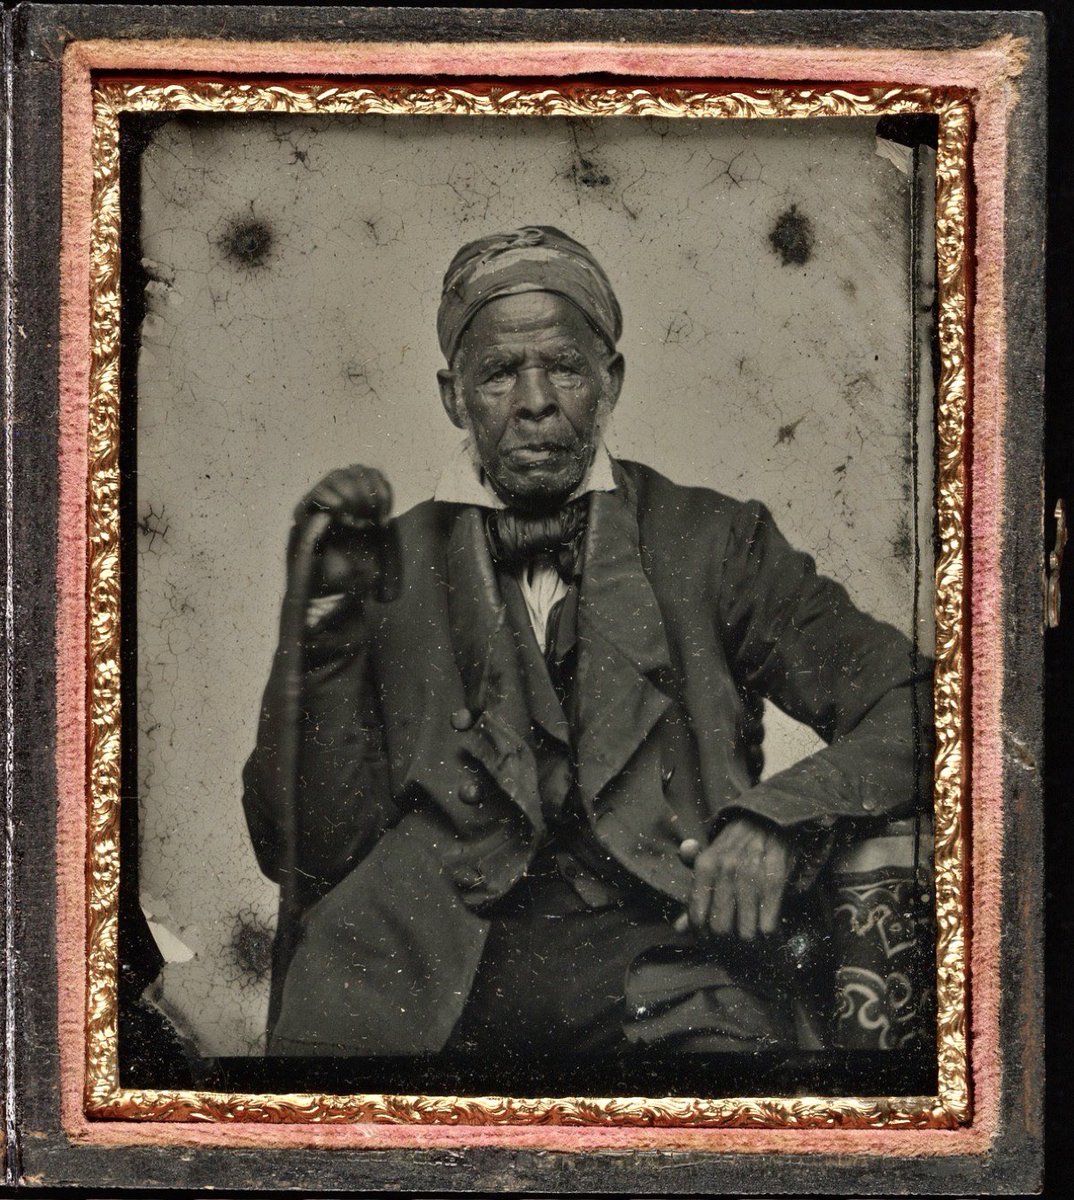 In 1807, Omar ibn Said, a Muslim scholar, was stolen from Senegal & sold into slavery in America. He left behind an autobiography written in Arabic. To mark the International Day for the Remembrance of the Slave Trade & its Abolition, a thread on the remarkable story of Omar...